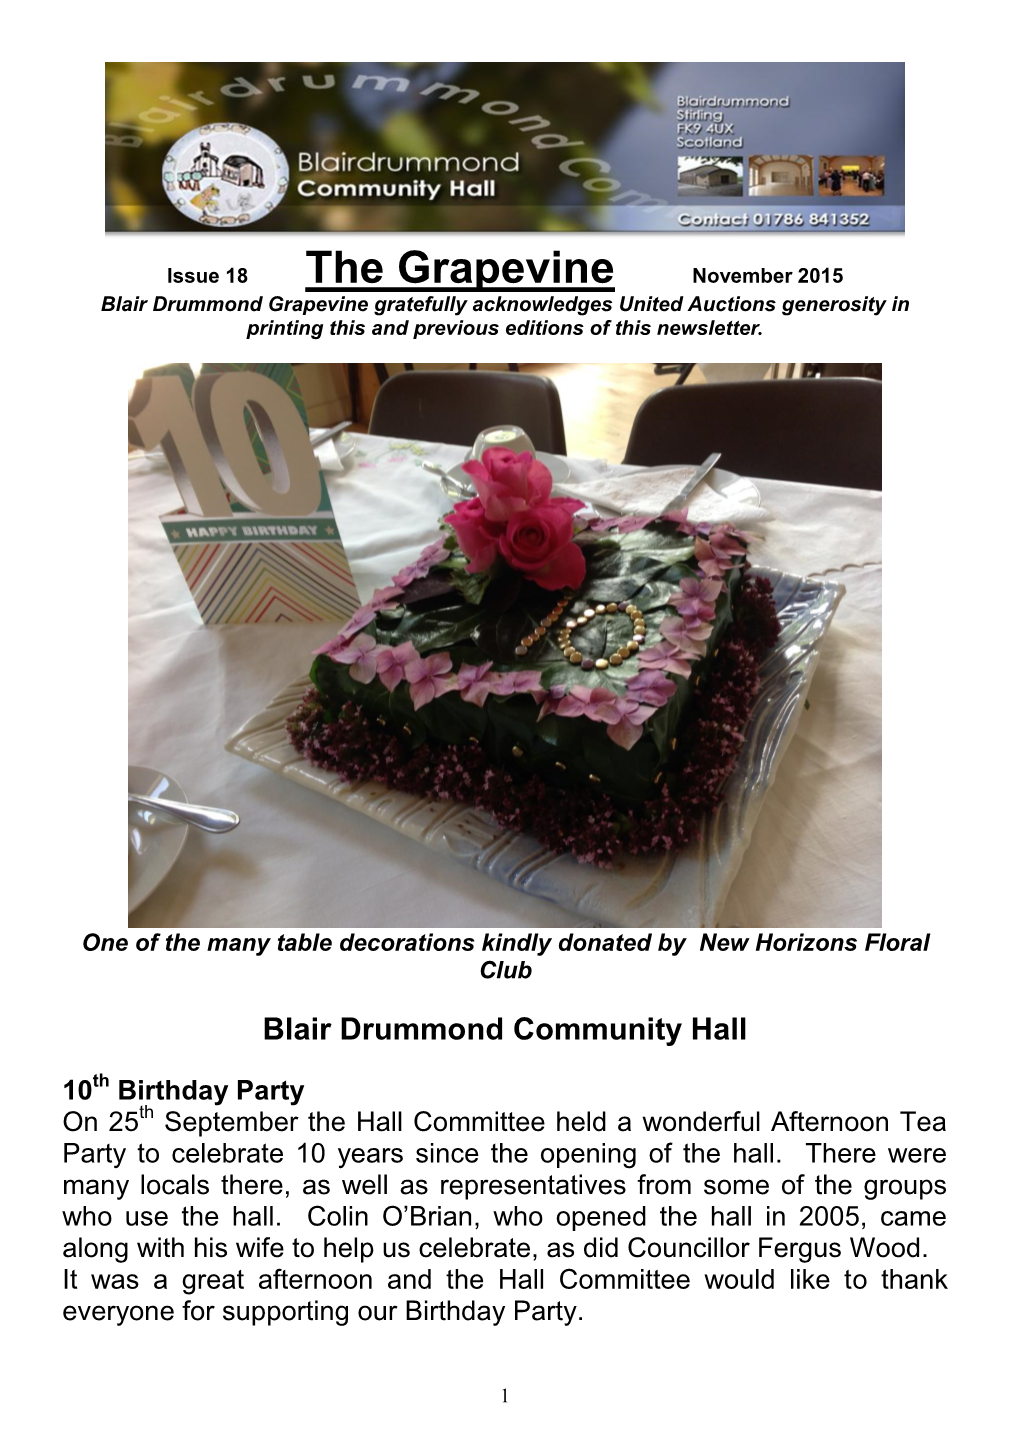 The Grapevine November 2015 Blair Drummond Grapevine Gratefully Acknowledges United Auctions Generosity in Printing This and Previous Editions of This Newsletter